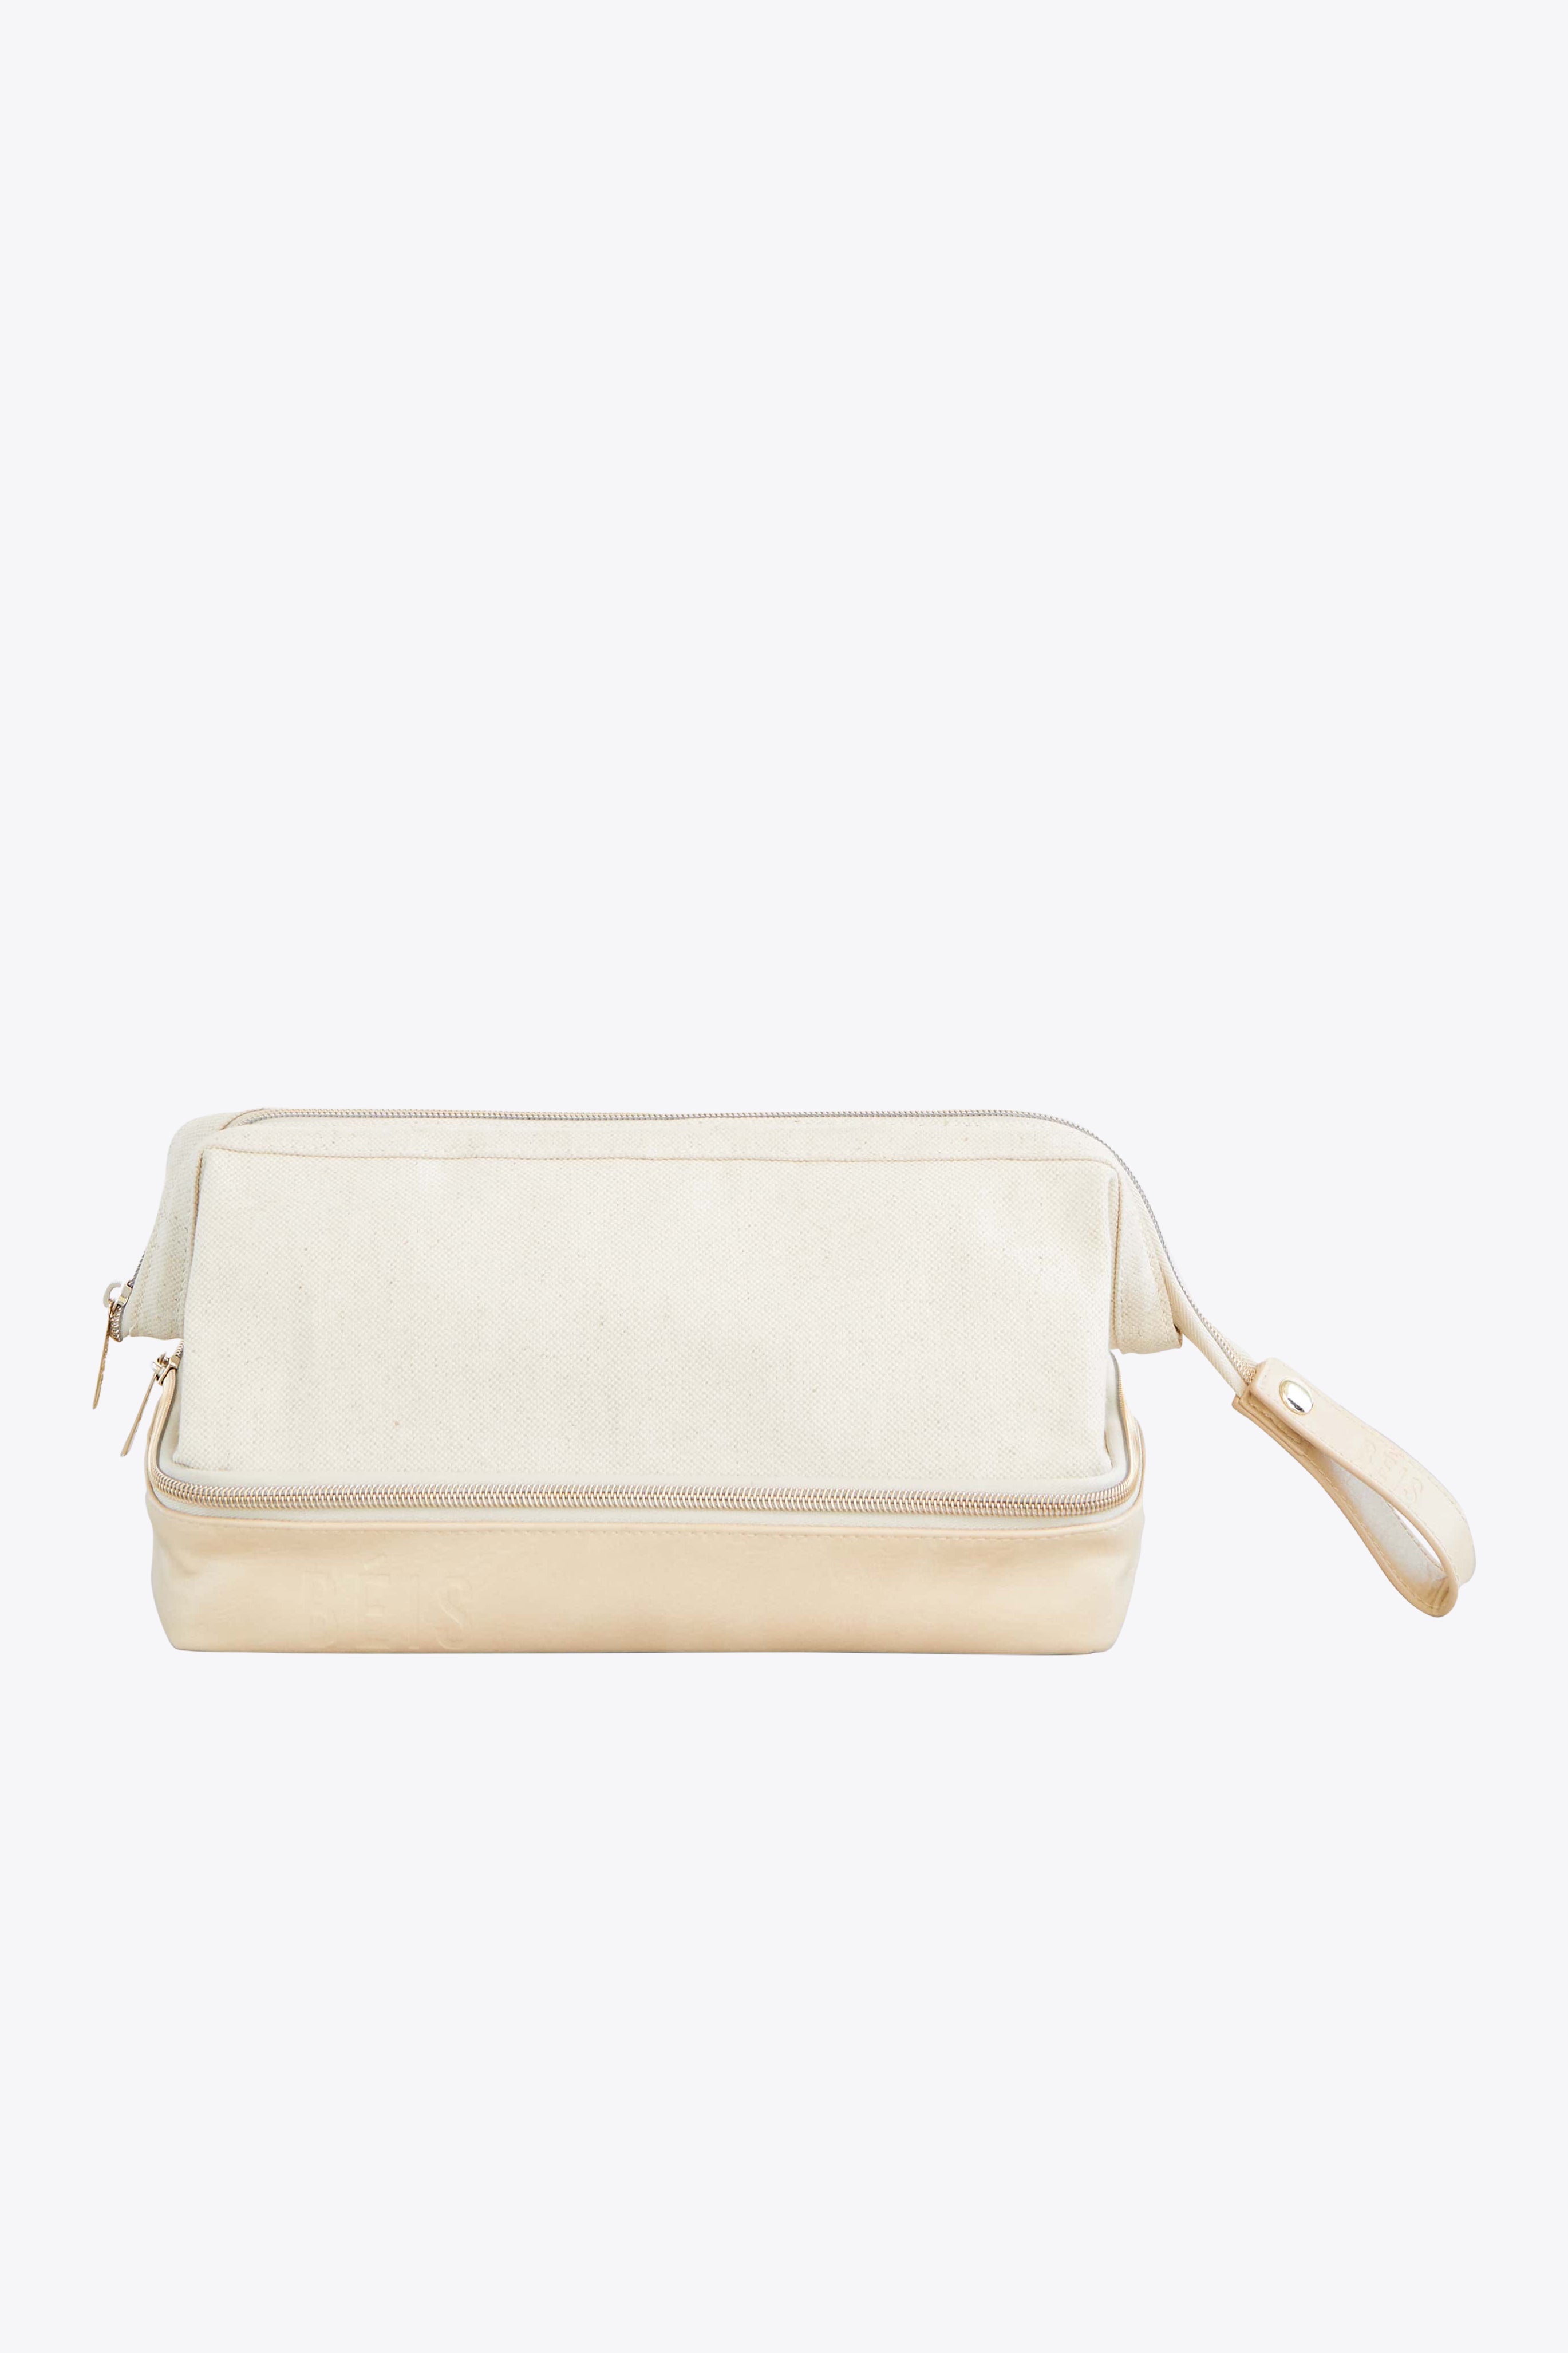 23 Products For Anyone Who Hates Carrying A Purse